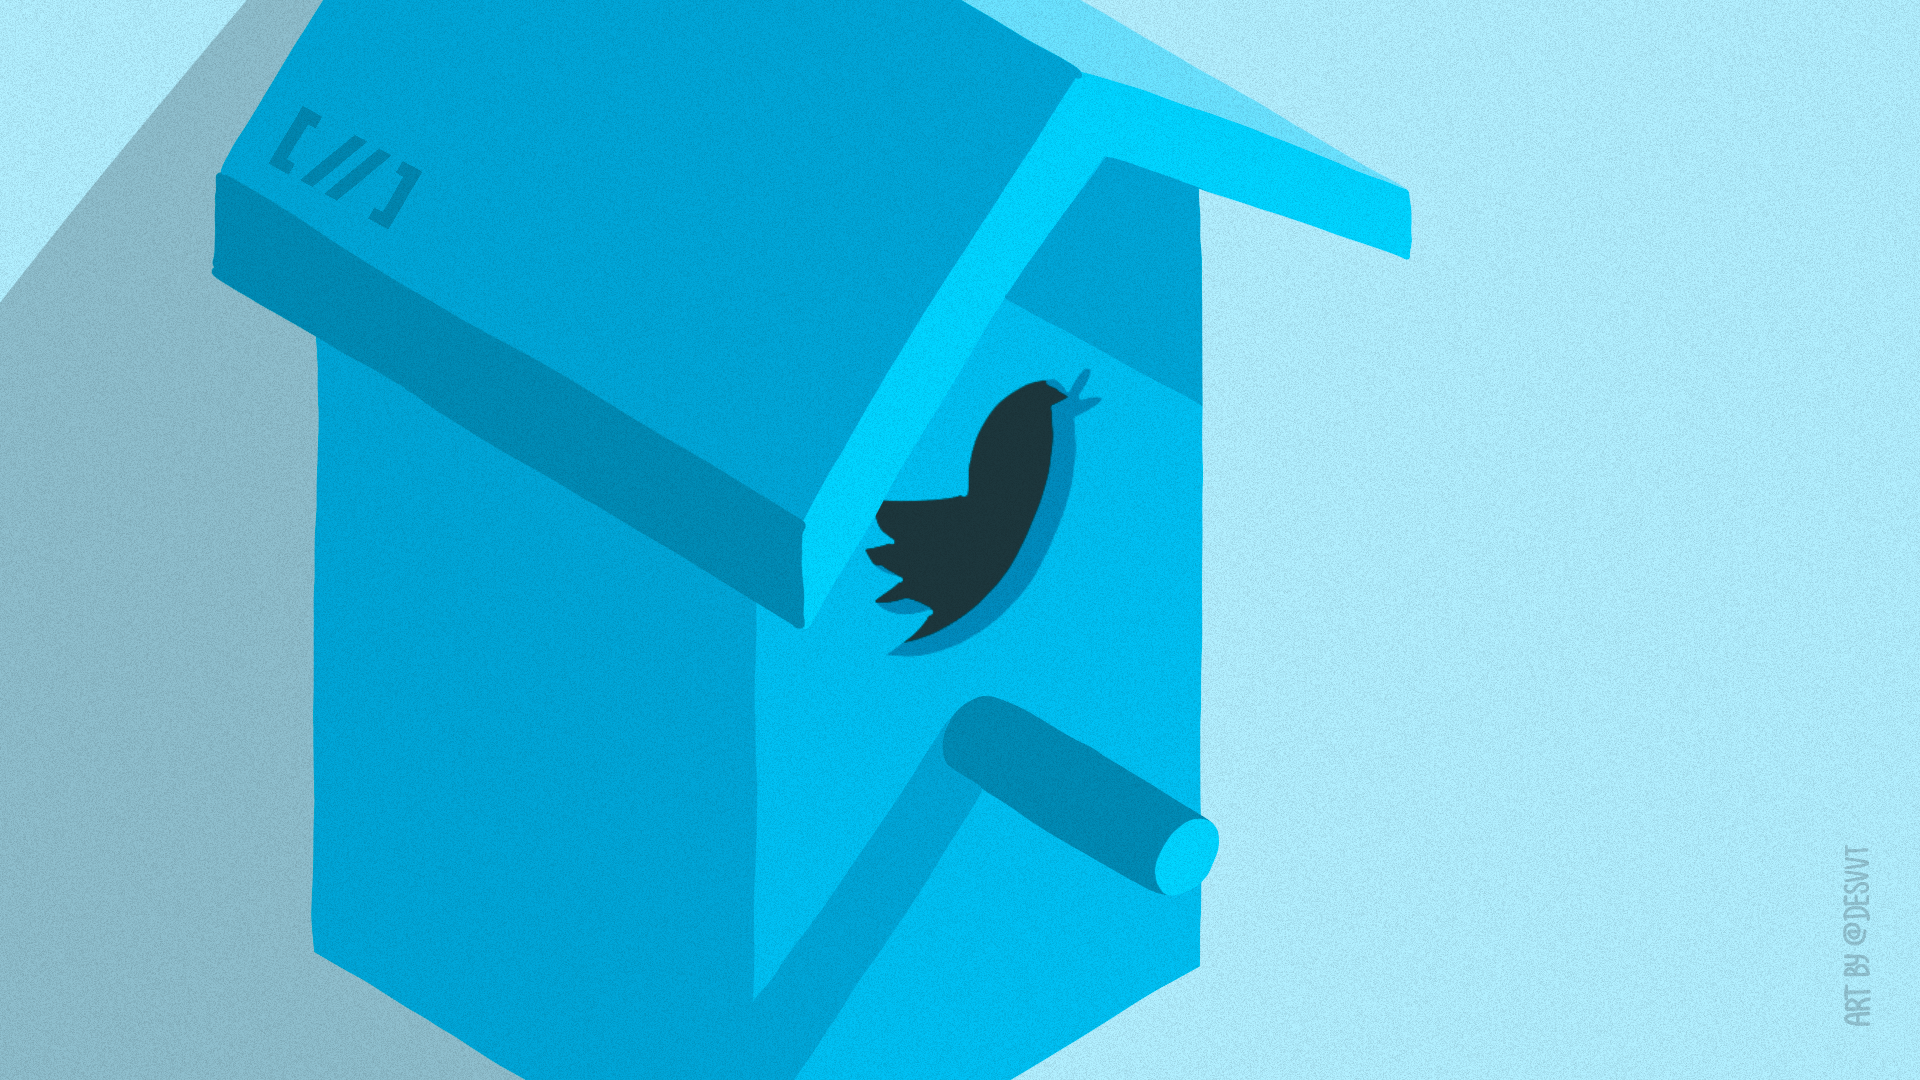 About 1,400 Twitter Employees Signed Up to Blind after Layoffs